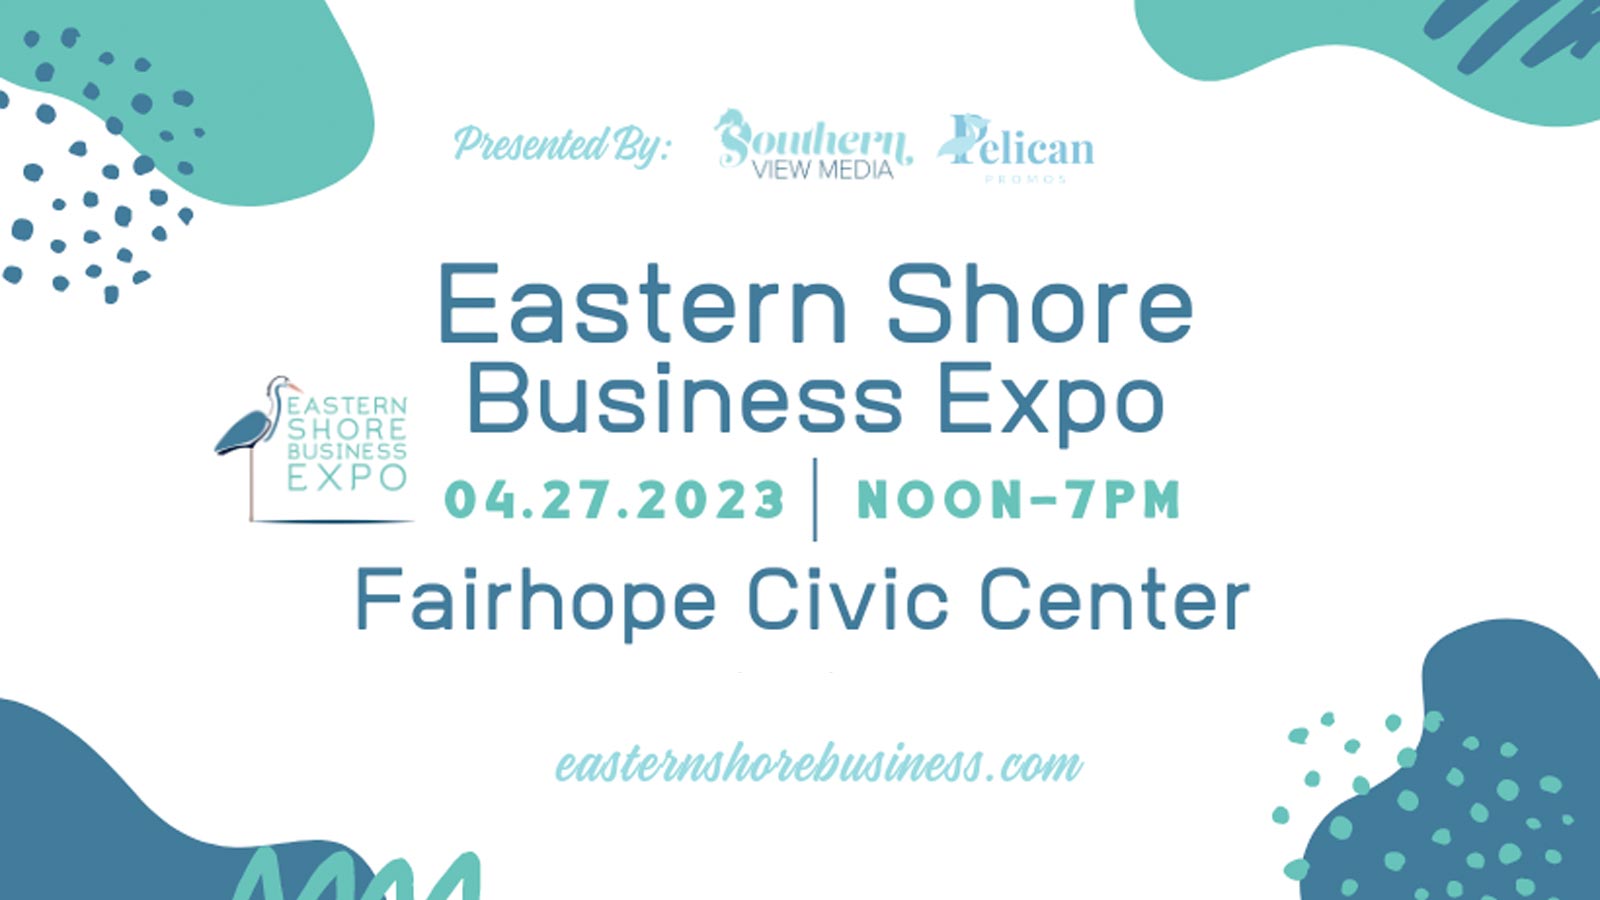 2023 Eastern Shore Business Expo Date Announced